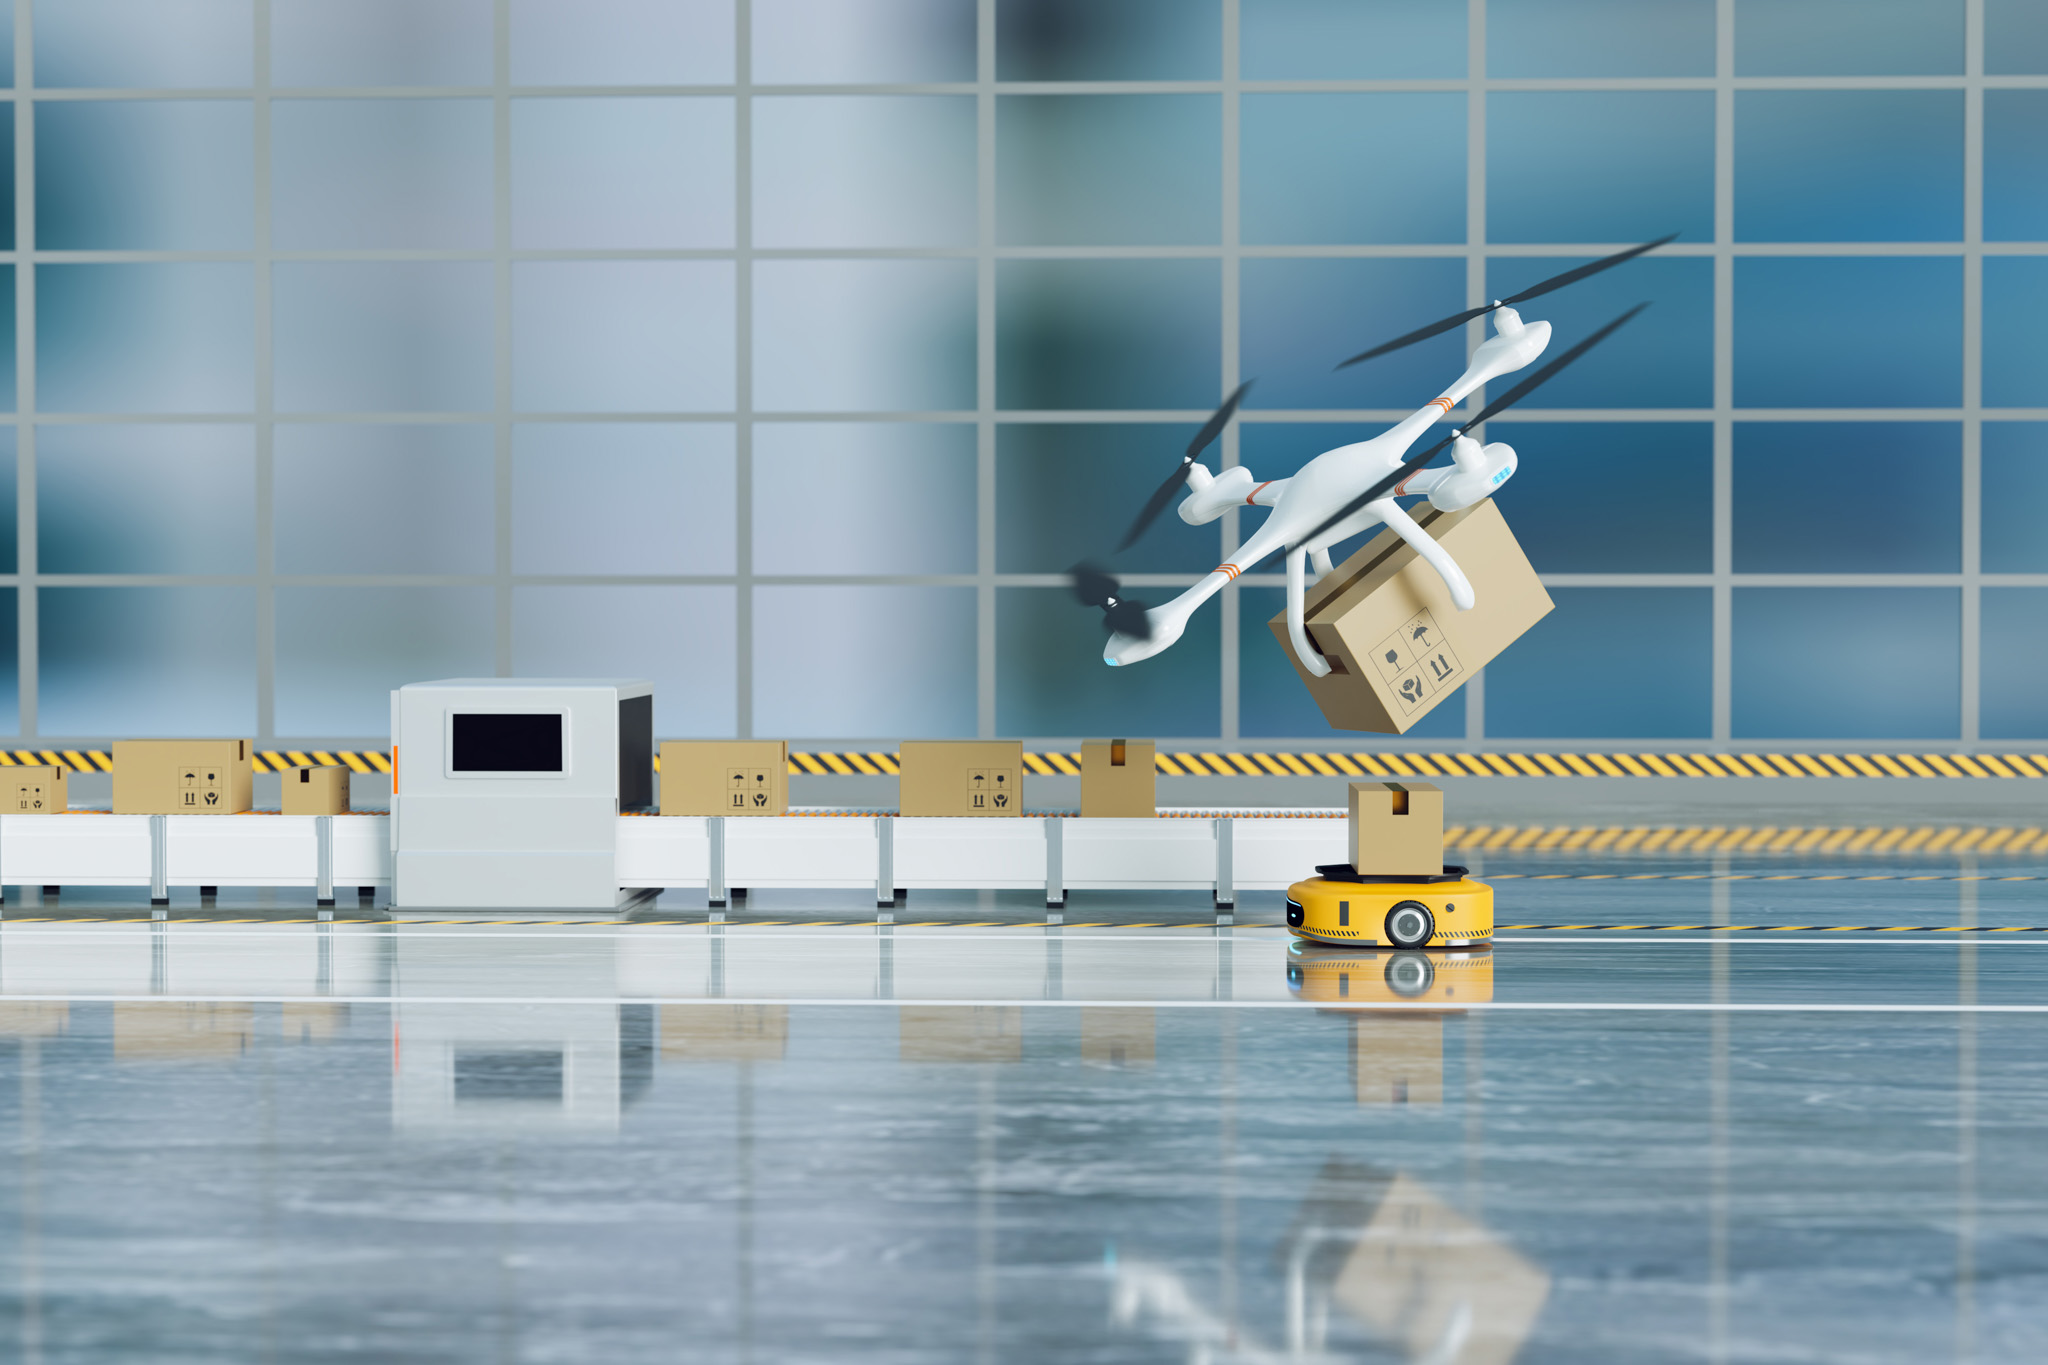 A drone transporting a package flies above a conveyor belt with boxes inside a modern warehouse, accompanied by an autonomous ground vehicle.